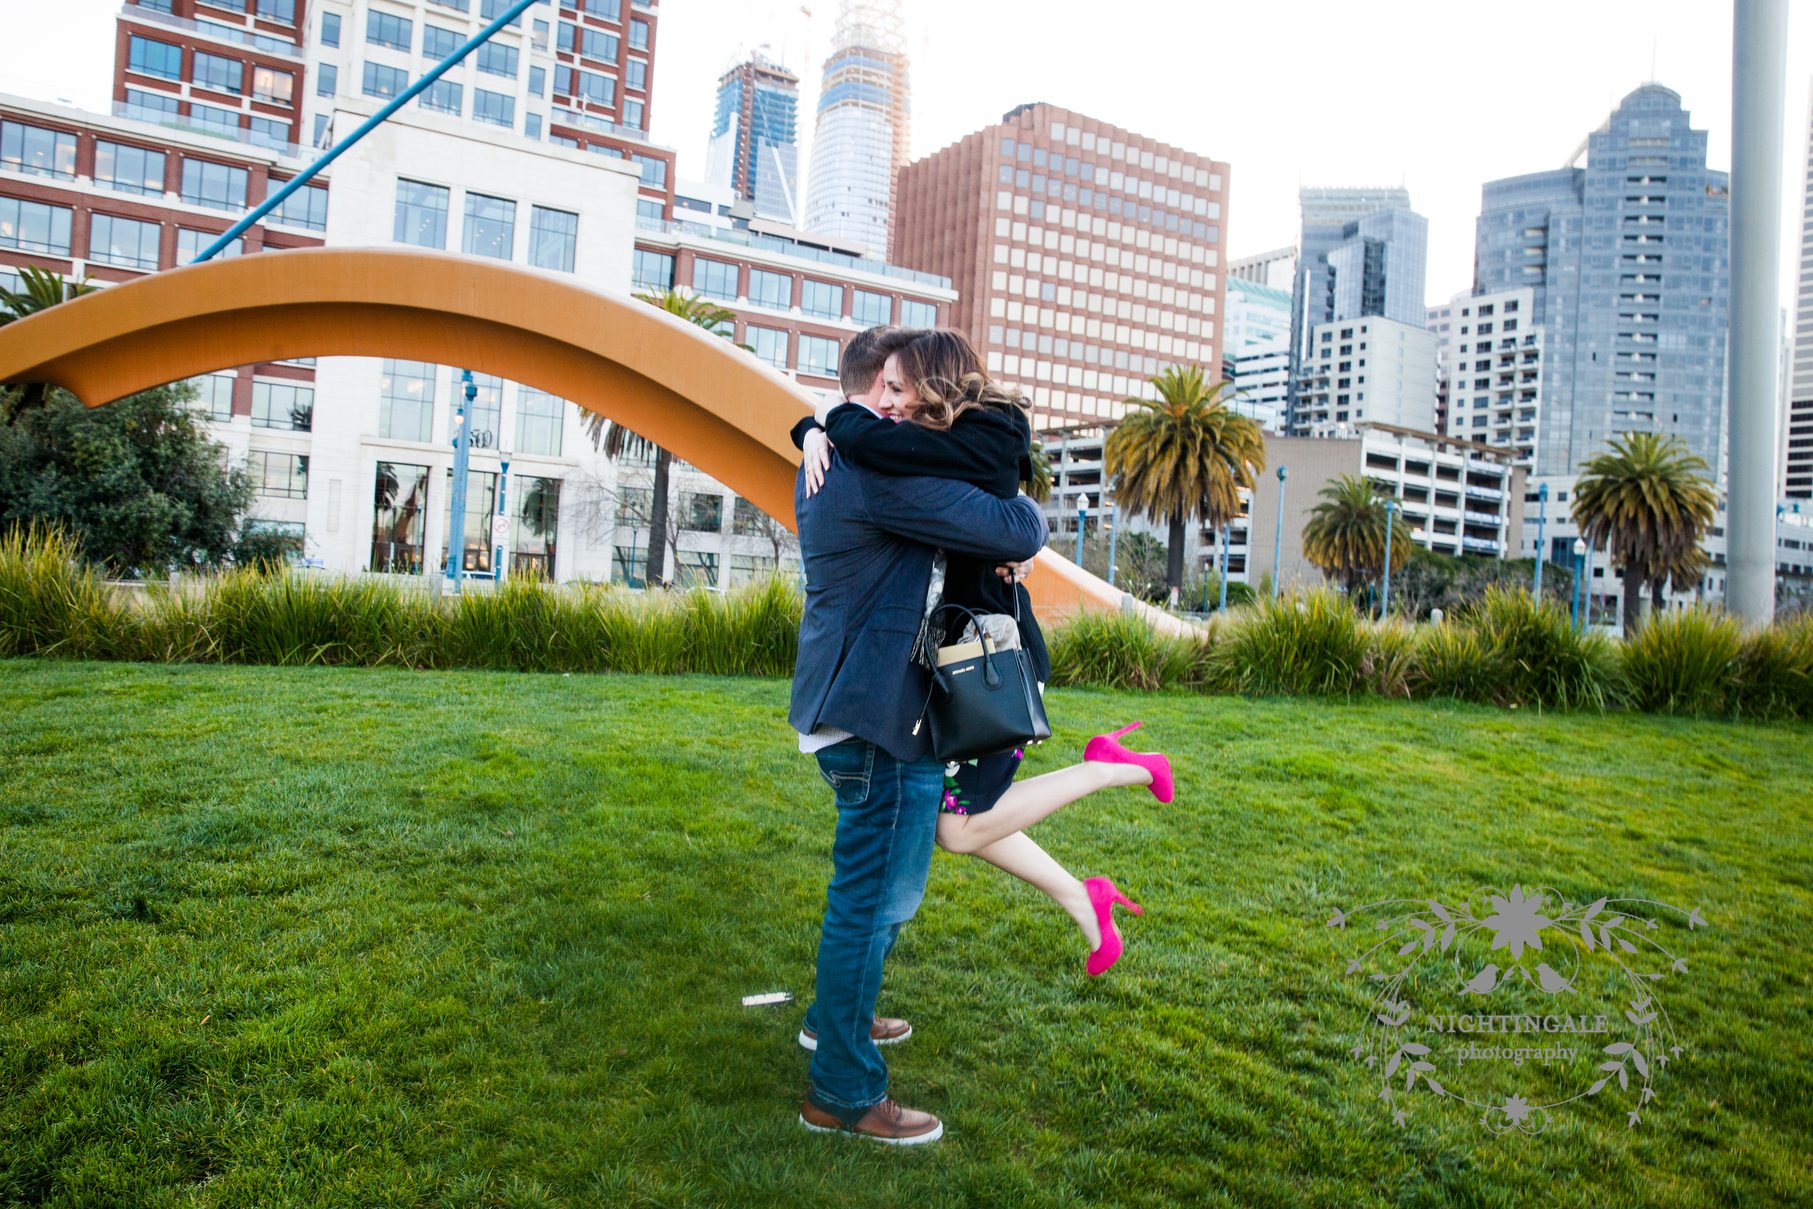 Marriage proposal in San Francisco